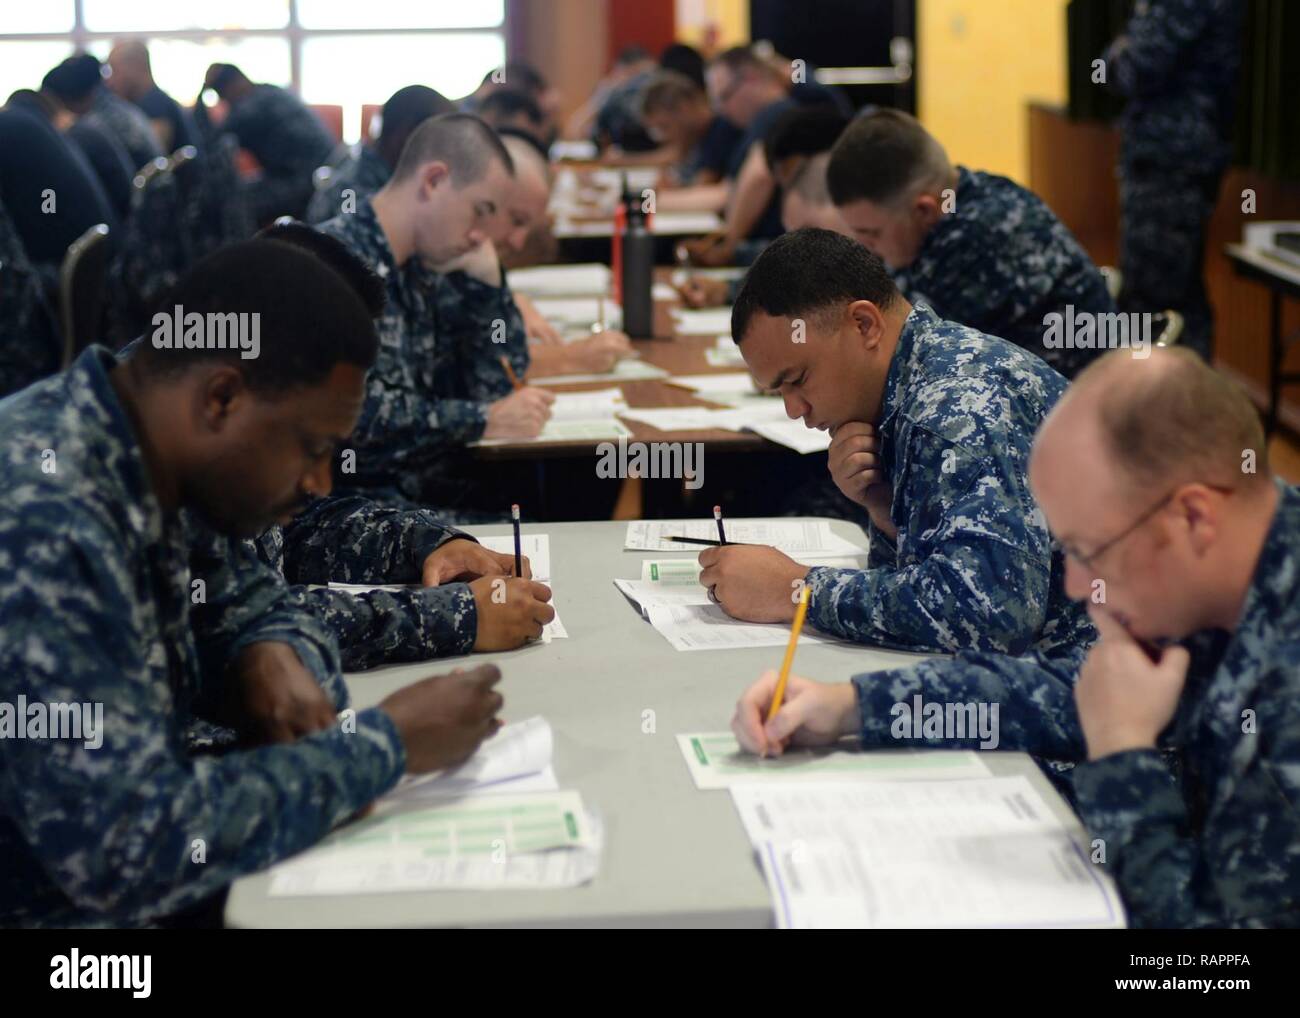 ANTA RITA, Guam (March 2, 2017) – Second class petty officers, assigned to the submarine tender USS Frank Cable (AS 40), take the Navy-wide E-6 advancement exam at Naval Base Guam, March 2.  Frank Cable is forward-deployed to the island of Guam and conducts maintenance and support of submarines and surface vessels deployed to the U.S. 5th and 7th Fleet area of operations. Stock Photo